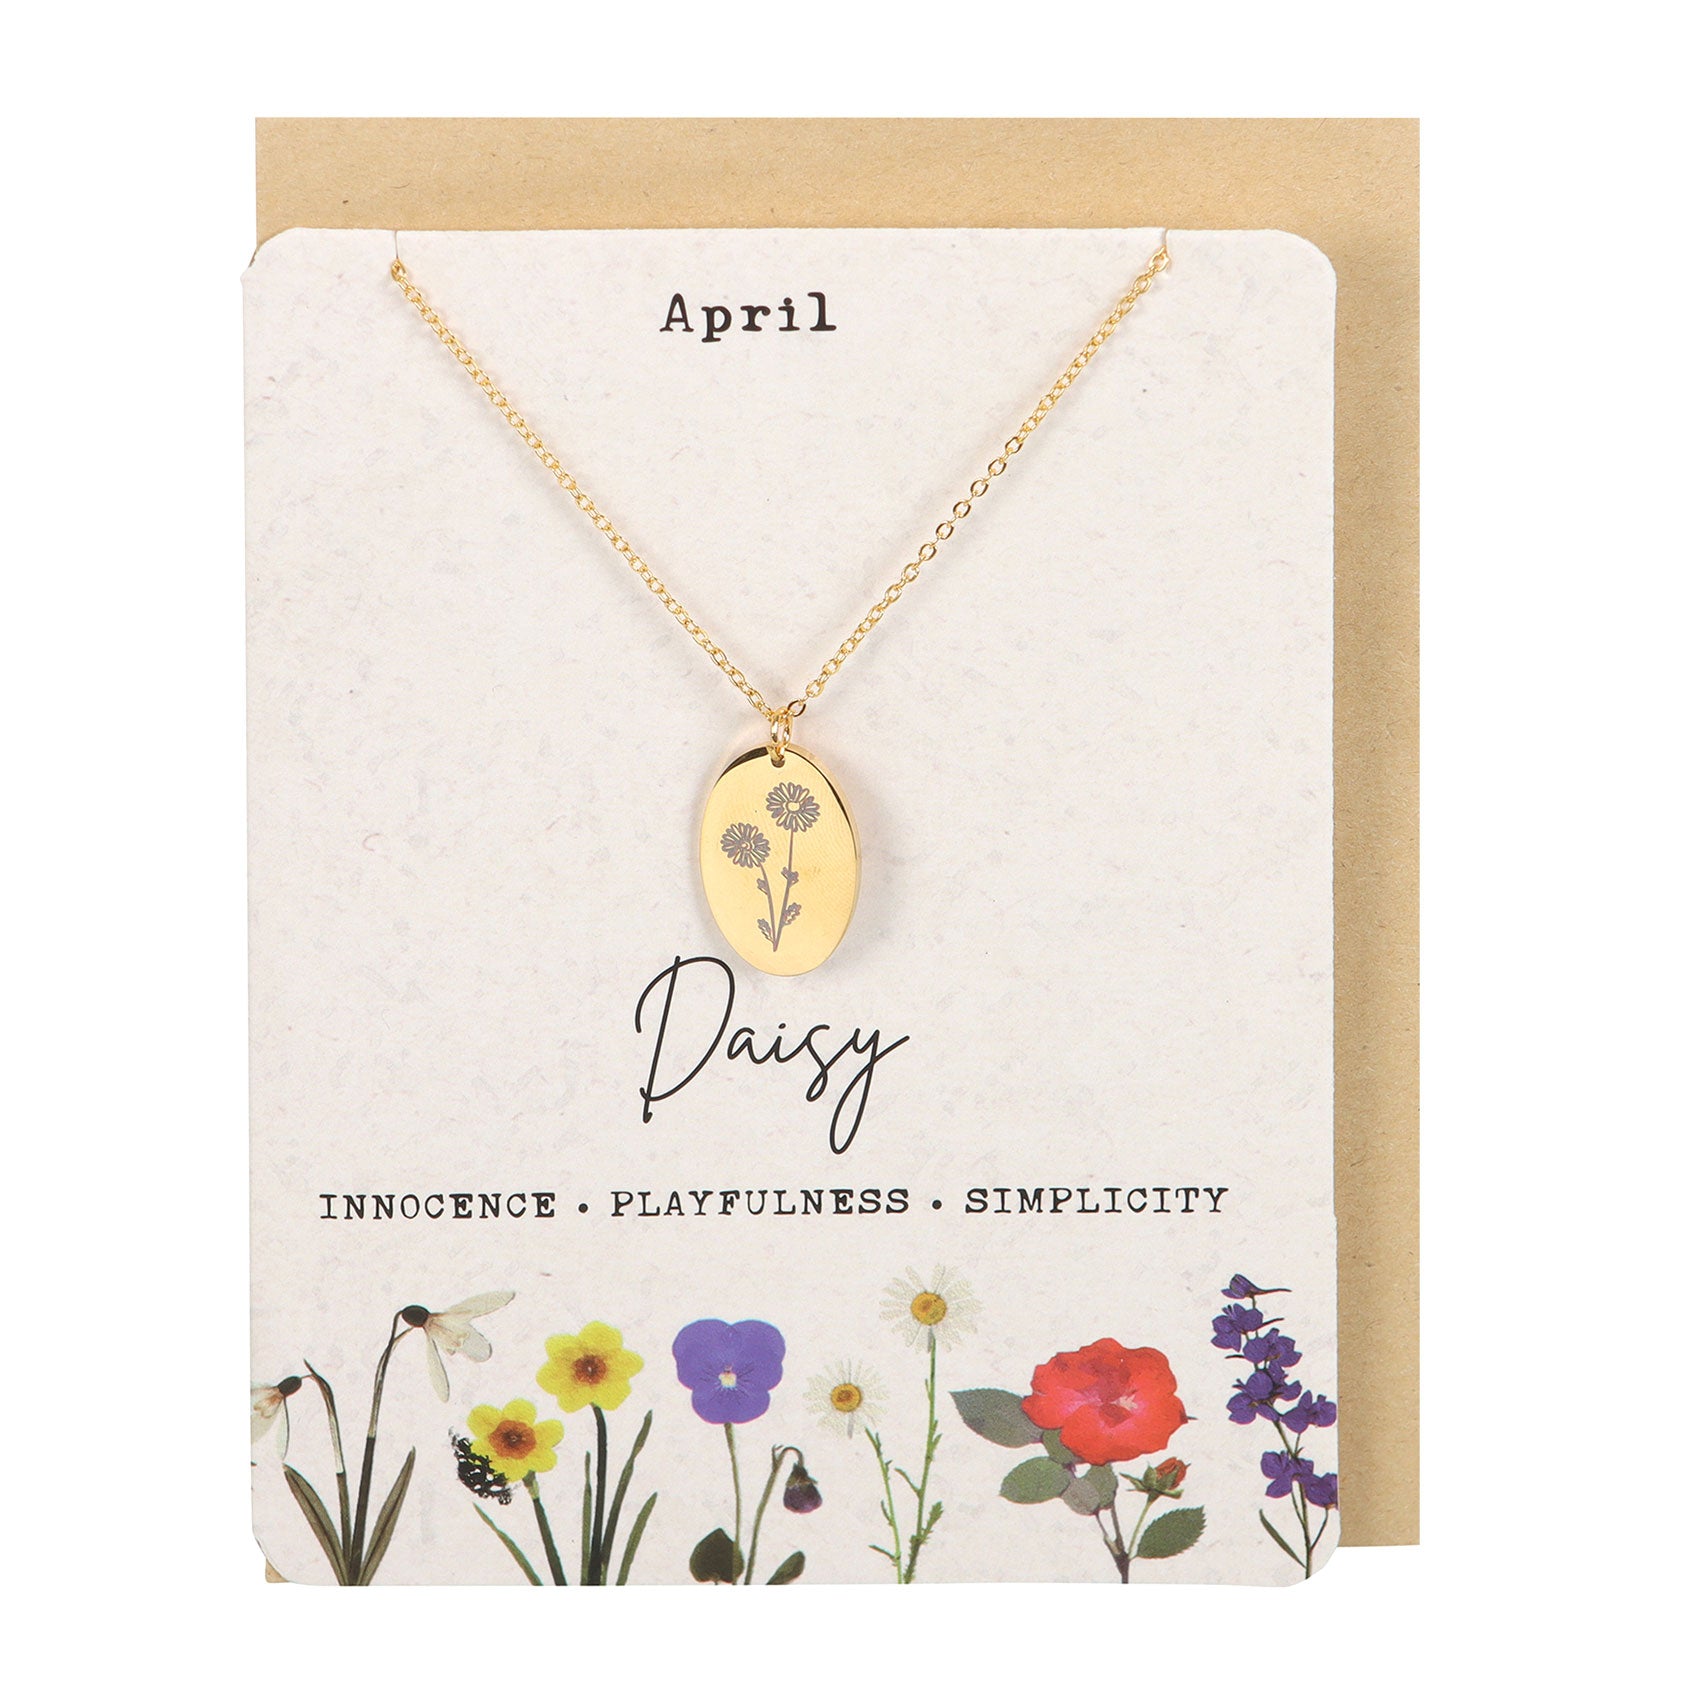 View April Daisy Birth Flower Necklace Card information